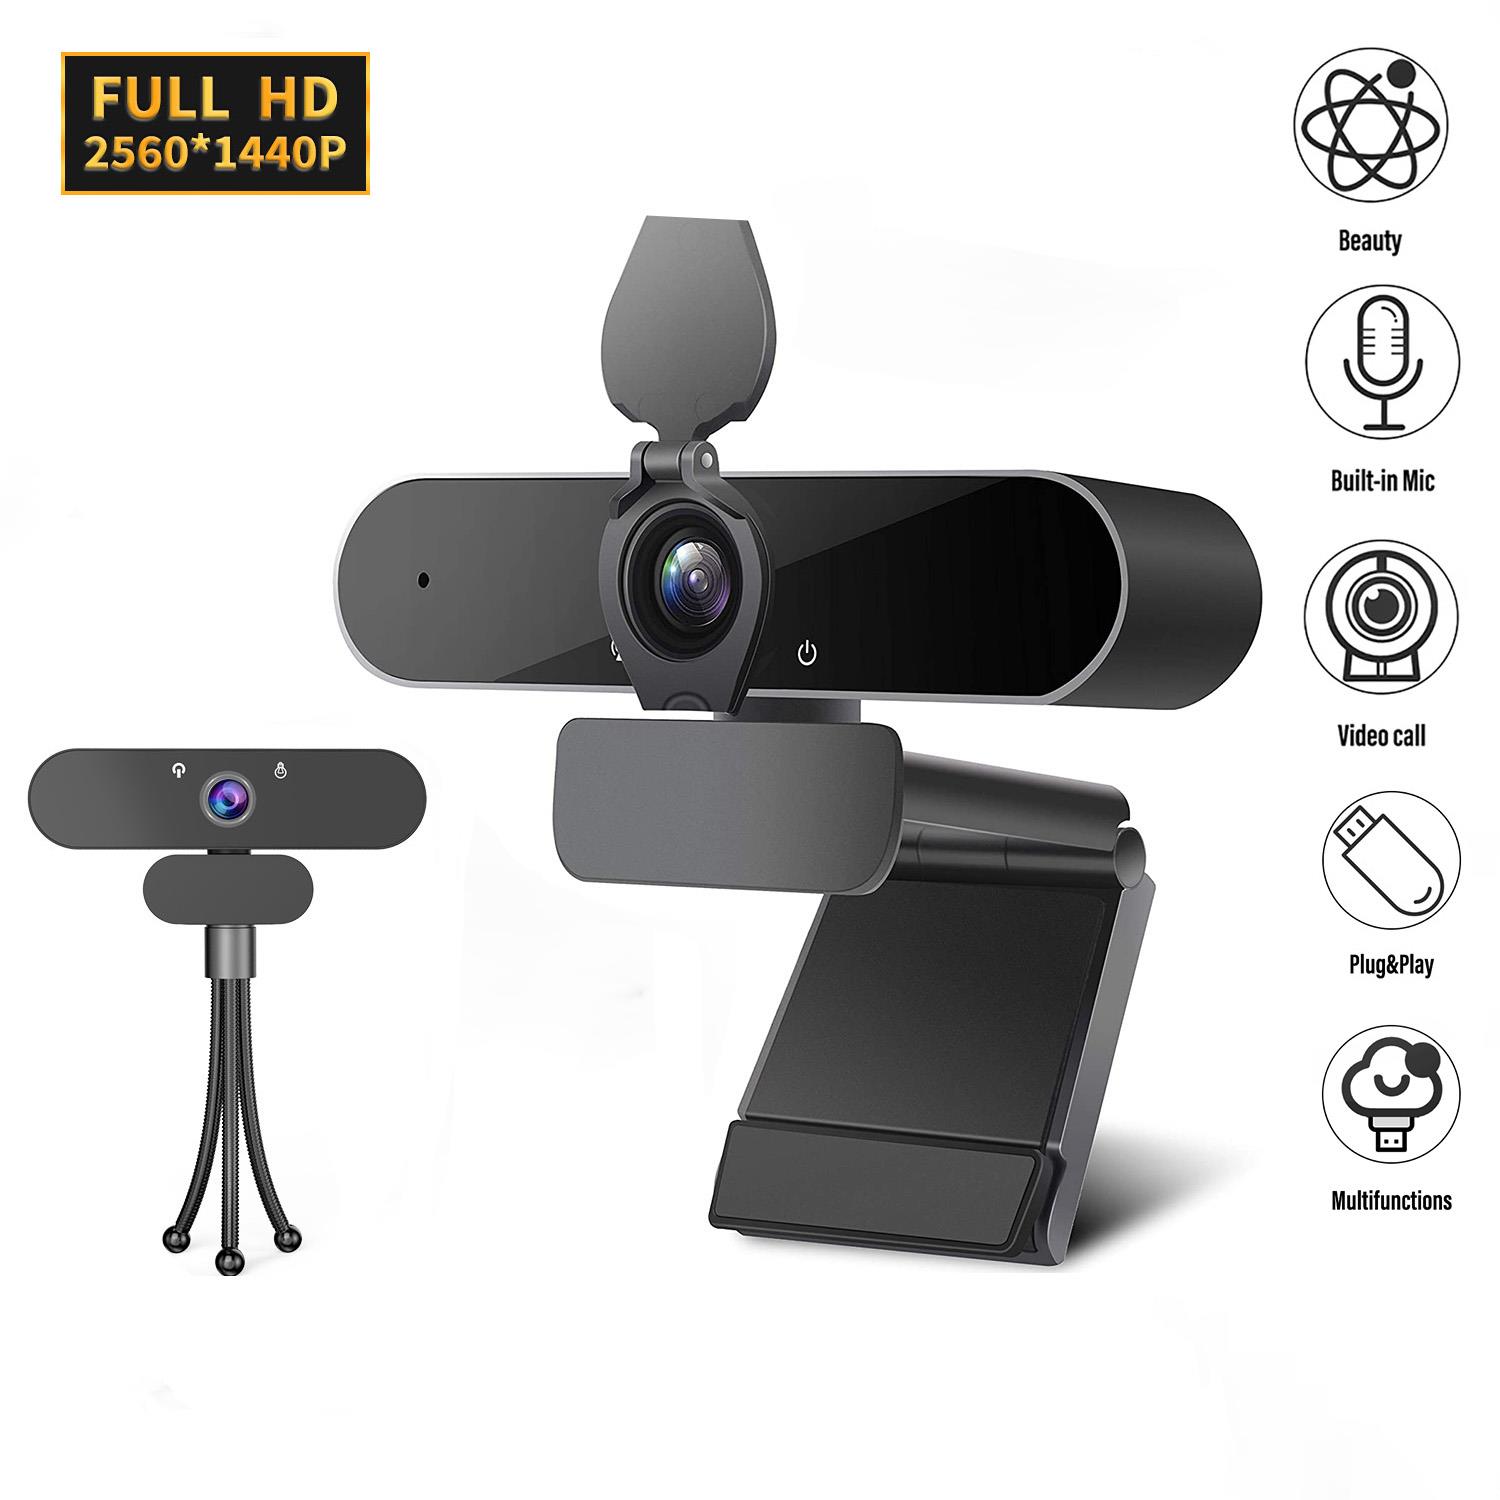 1440P HD Webcam with Microphone, 360° Wide-Angle Laptop Webcam, USB PC Computer Camera